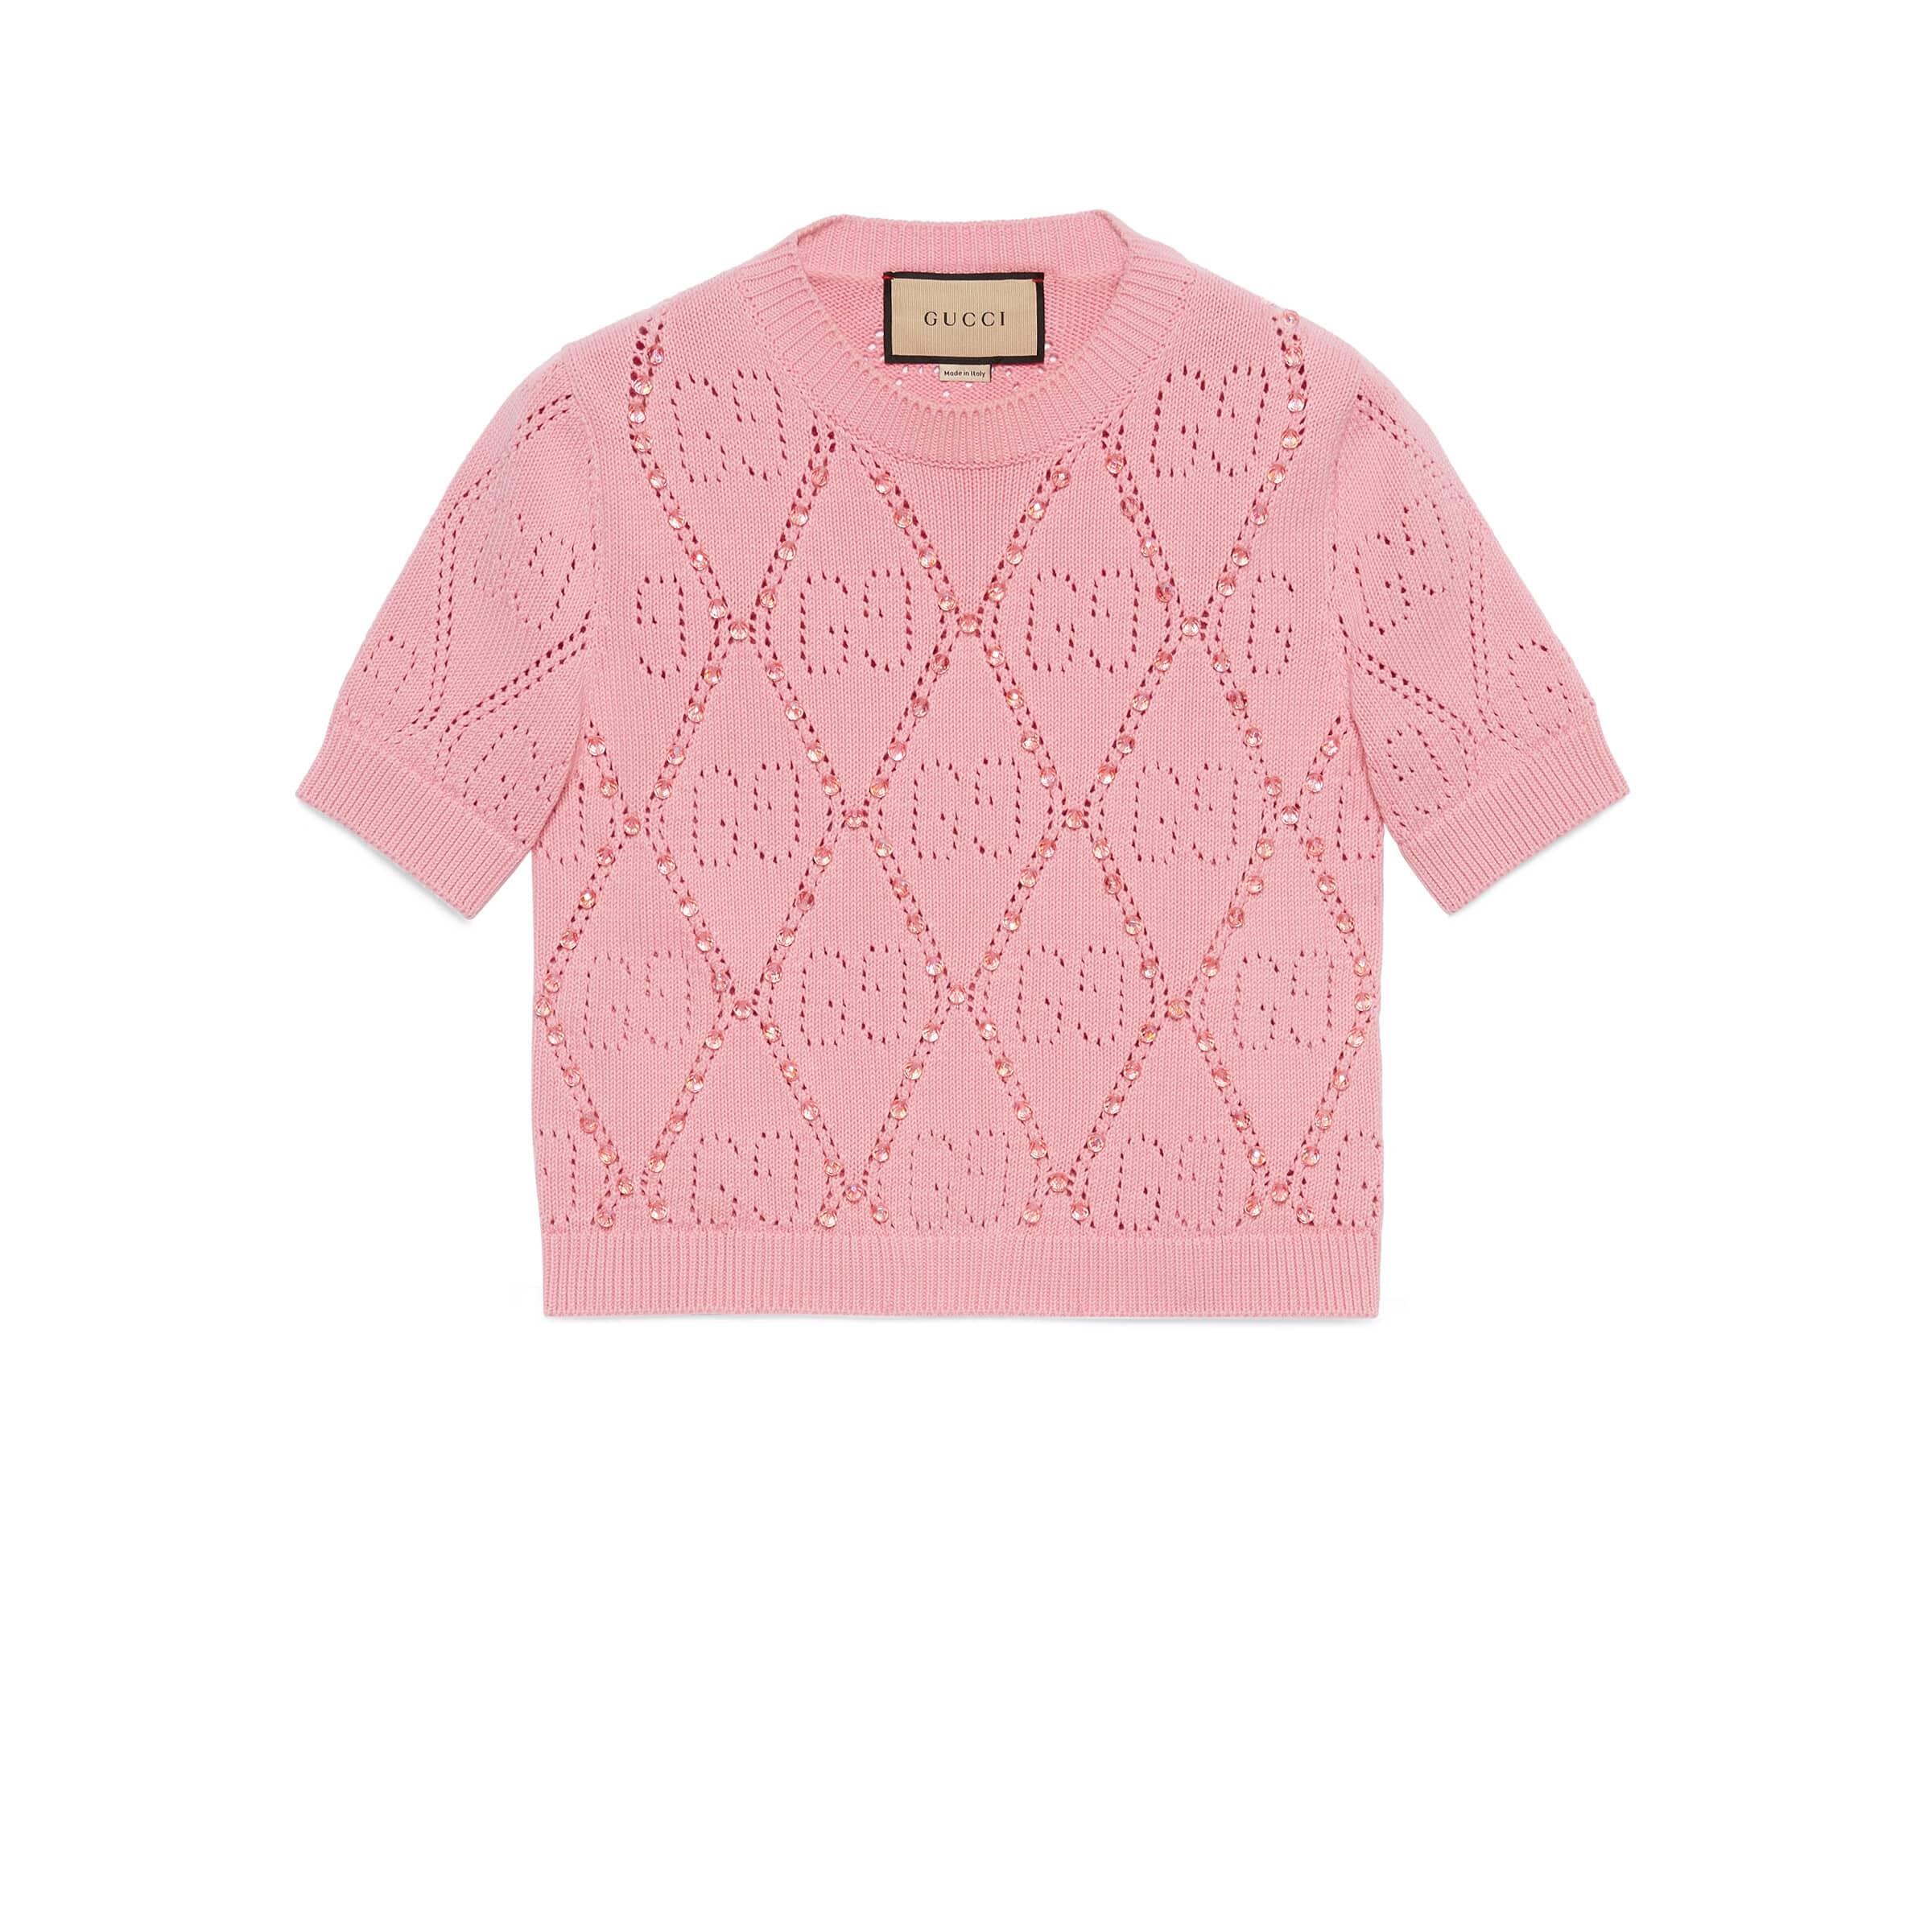 Gucci gg Cotton Knit T-shirt With Beads in Pink | Lyst